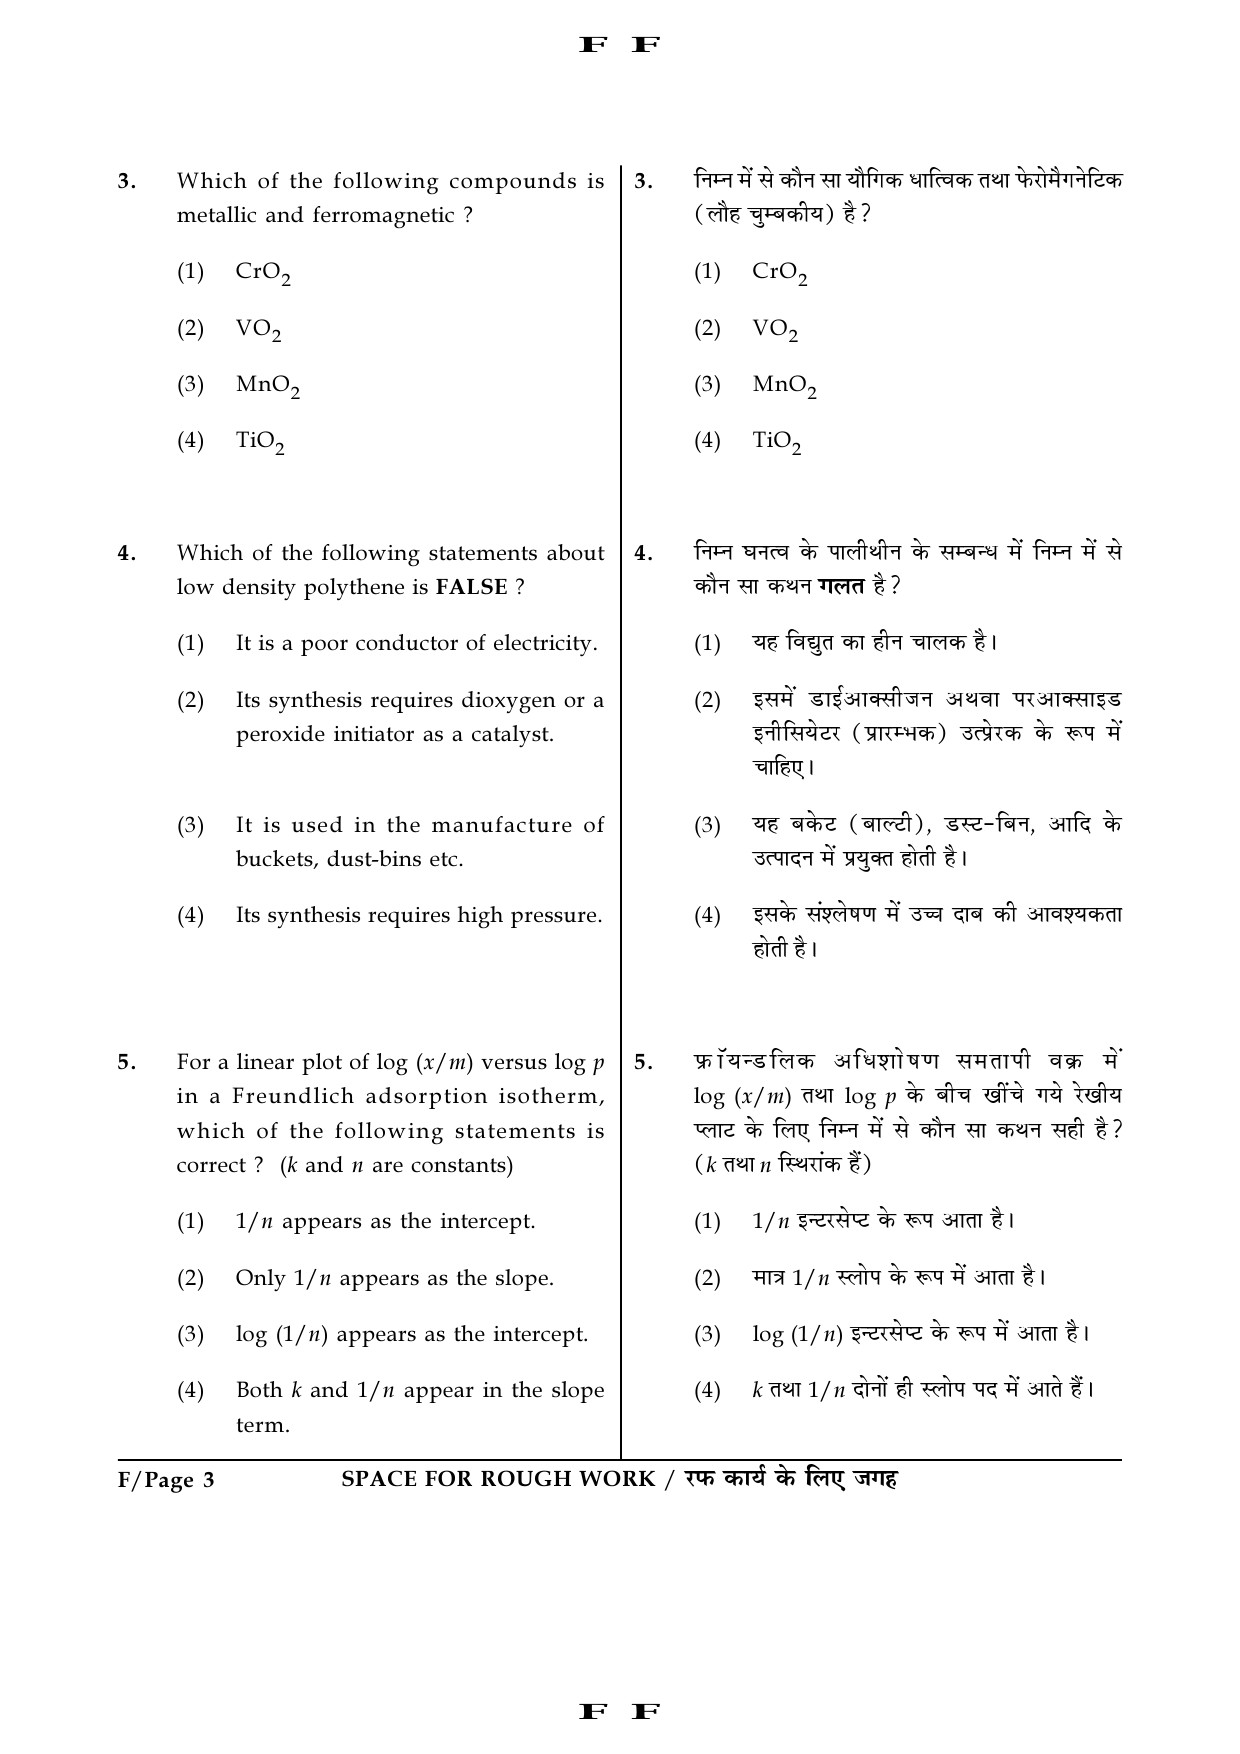 JEE Main Exam Question Paper 2016 Booklet F 3